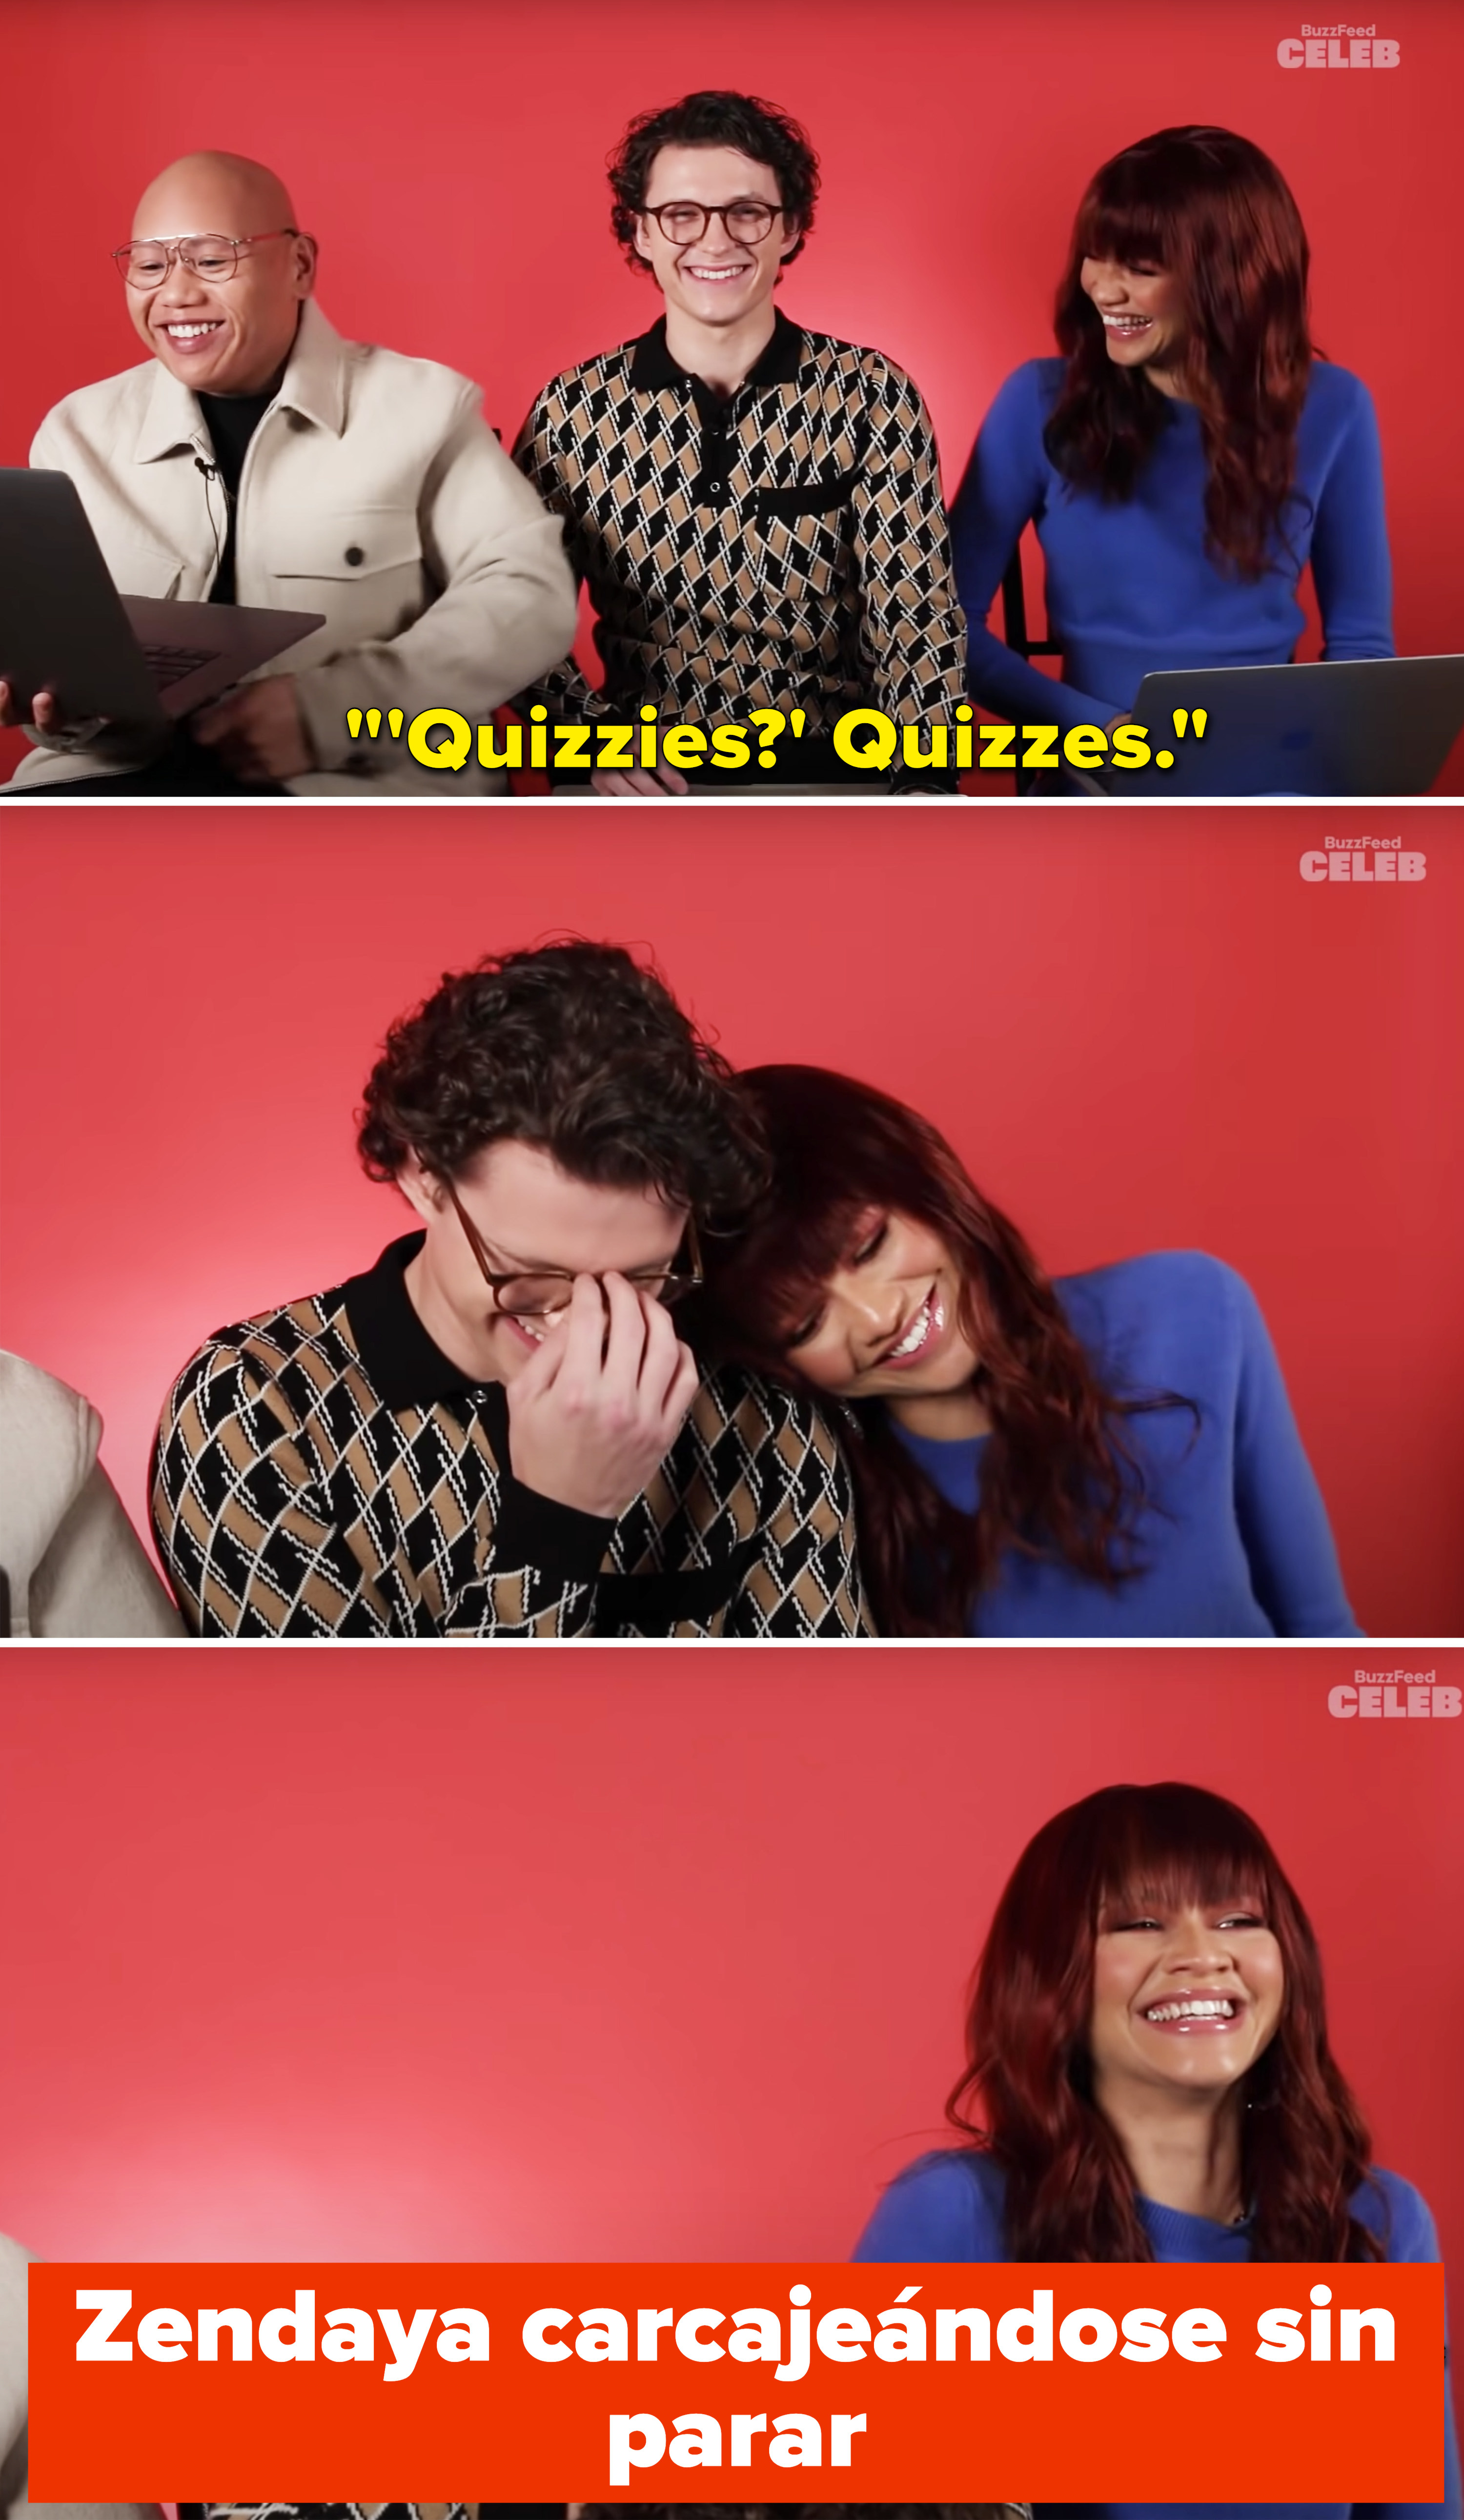 Zendaya laughing and repeating &quot;Quizzies&quot;